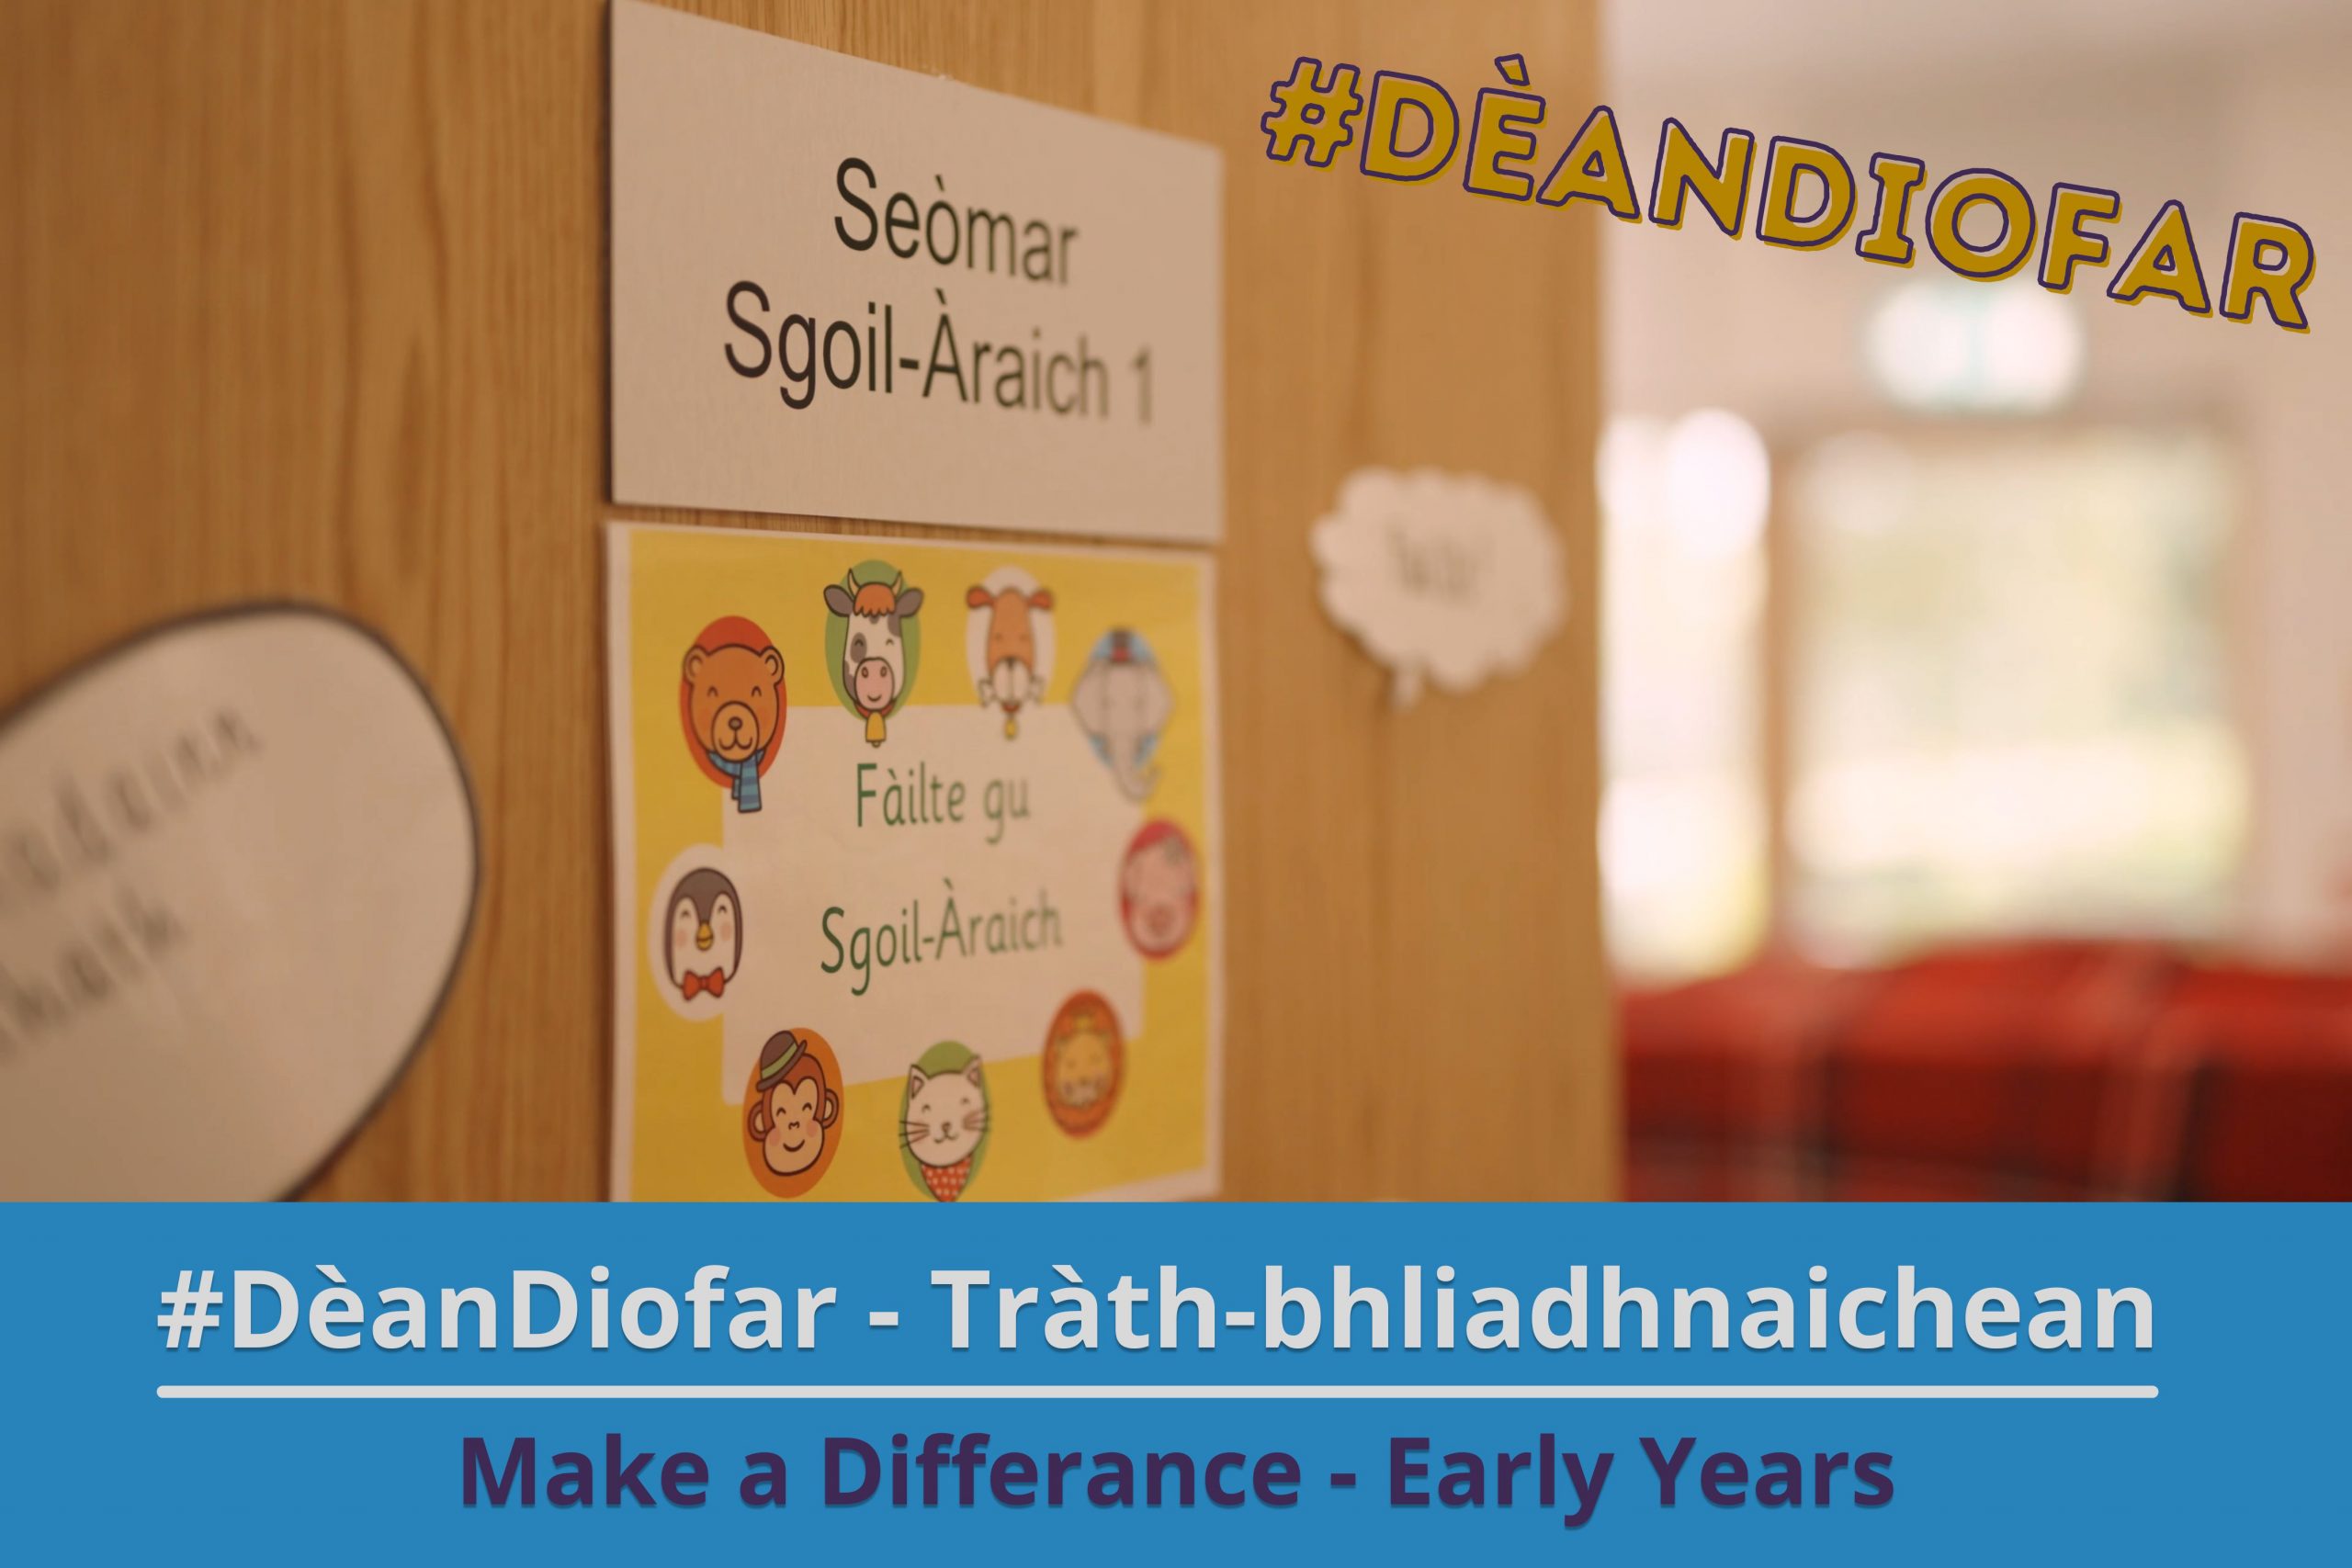 Making a Difference in the Early Years with #DèanDiofar